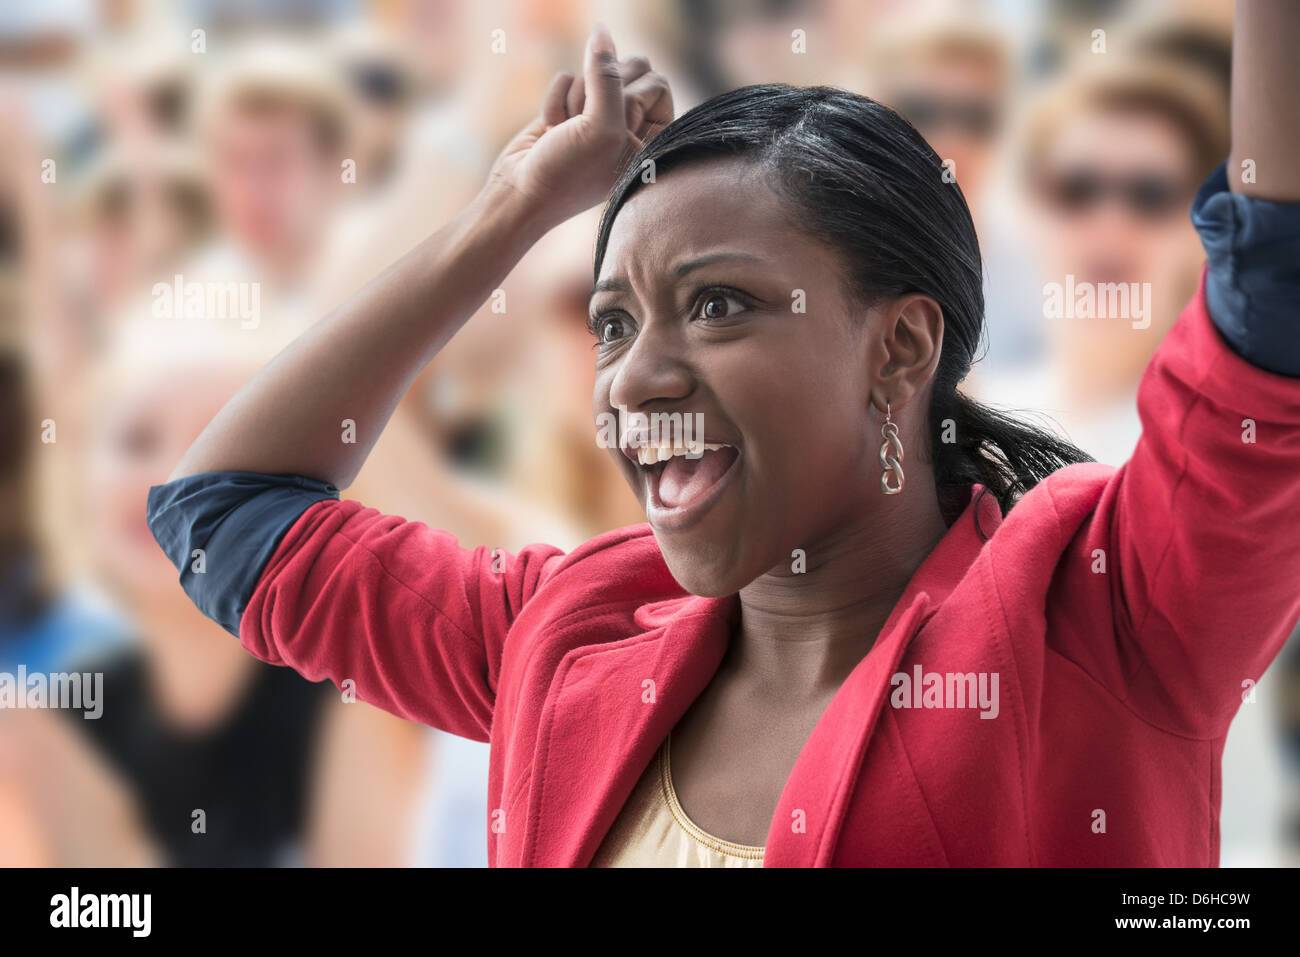 Excited woman in crowd Stock Photo